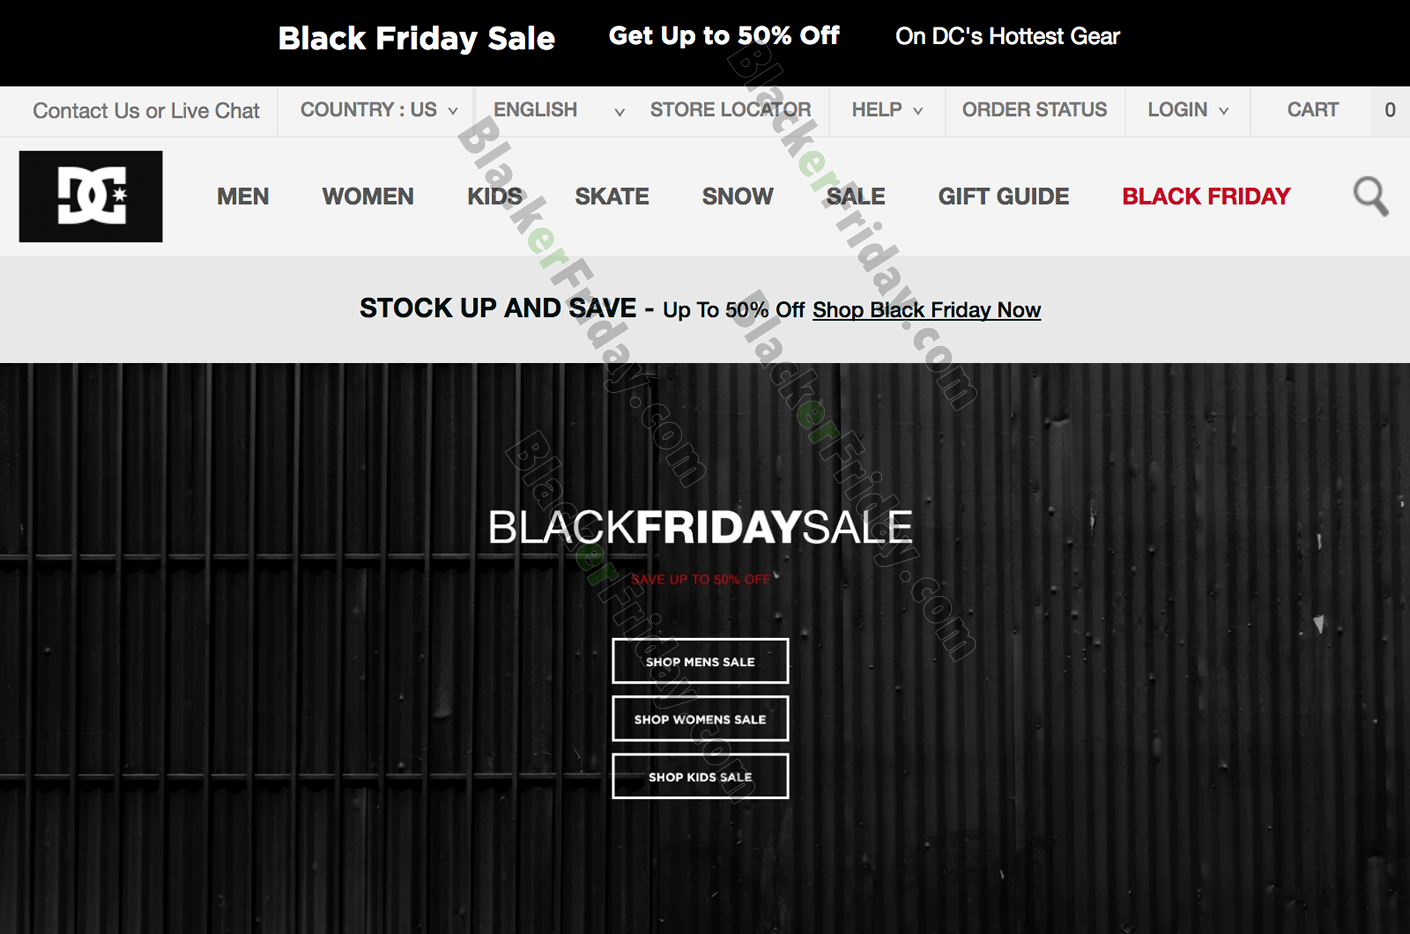 DC Shoes Black Friday 2021 Sale - What 